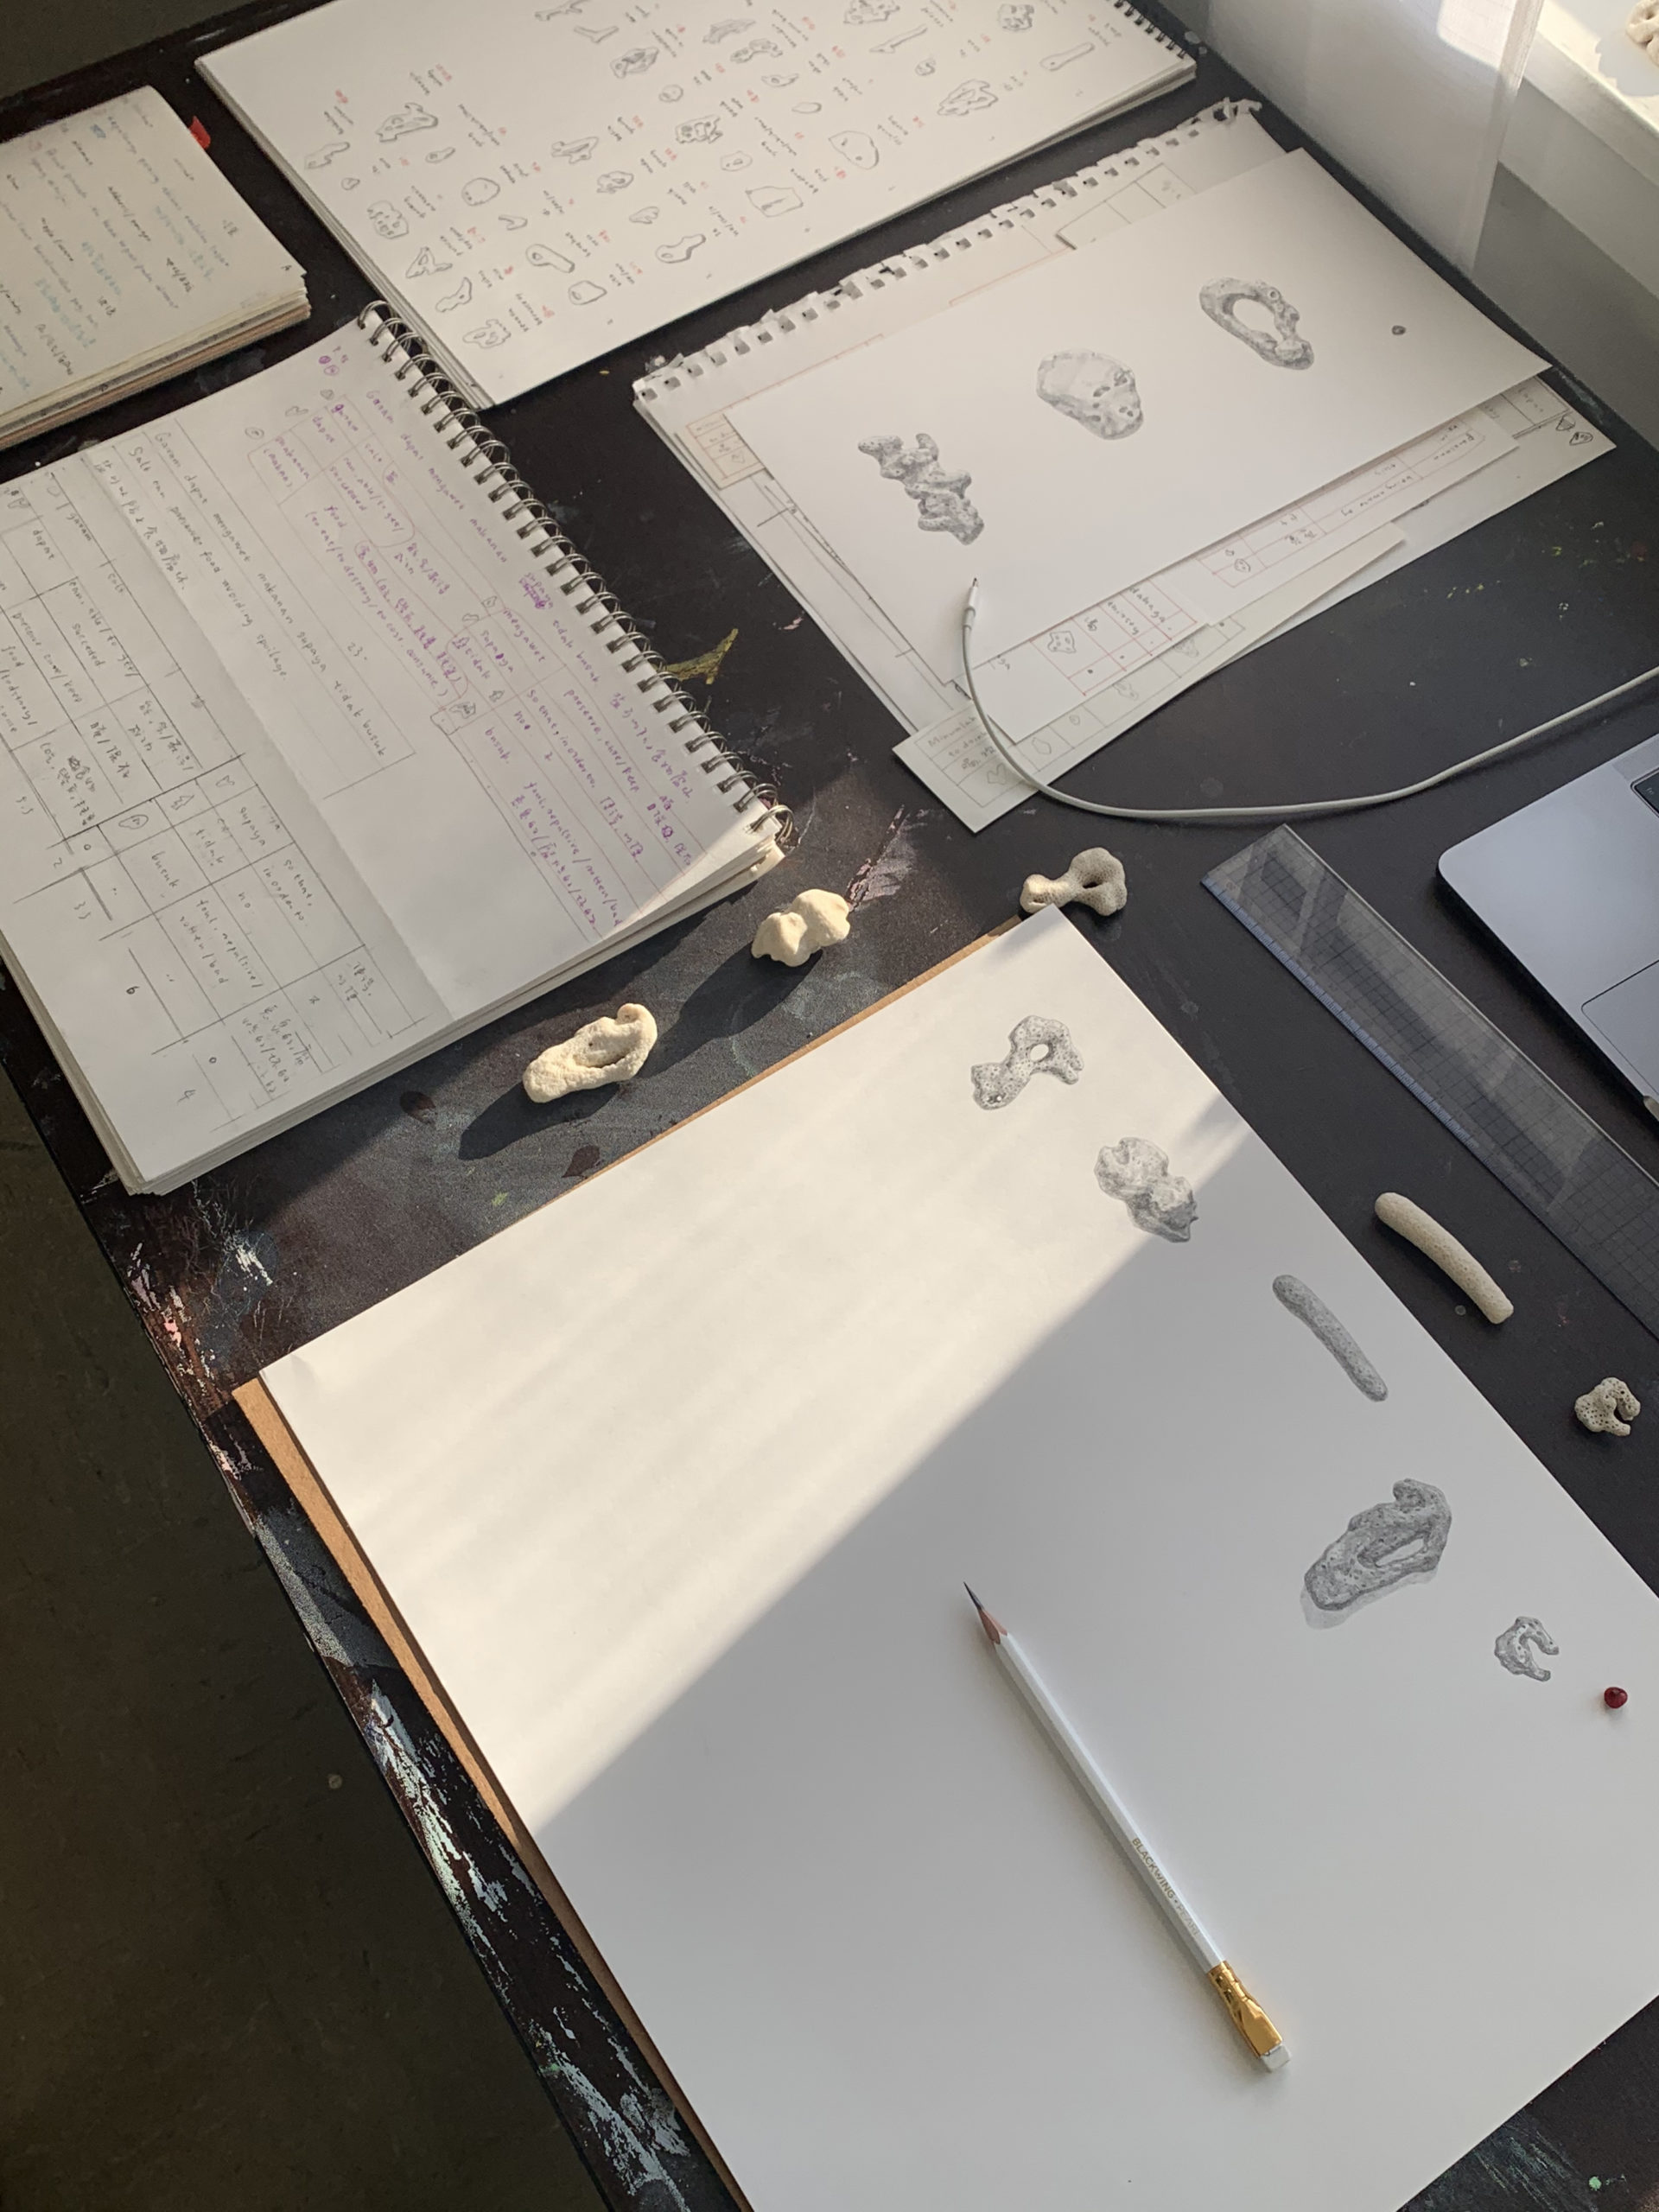 Close-up view of a desk with a sketchbook with drawings of small figures, similar small figures in clay sitting nearby on the desk, and other books and papers beside them.